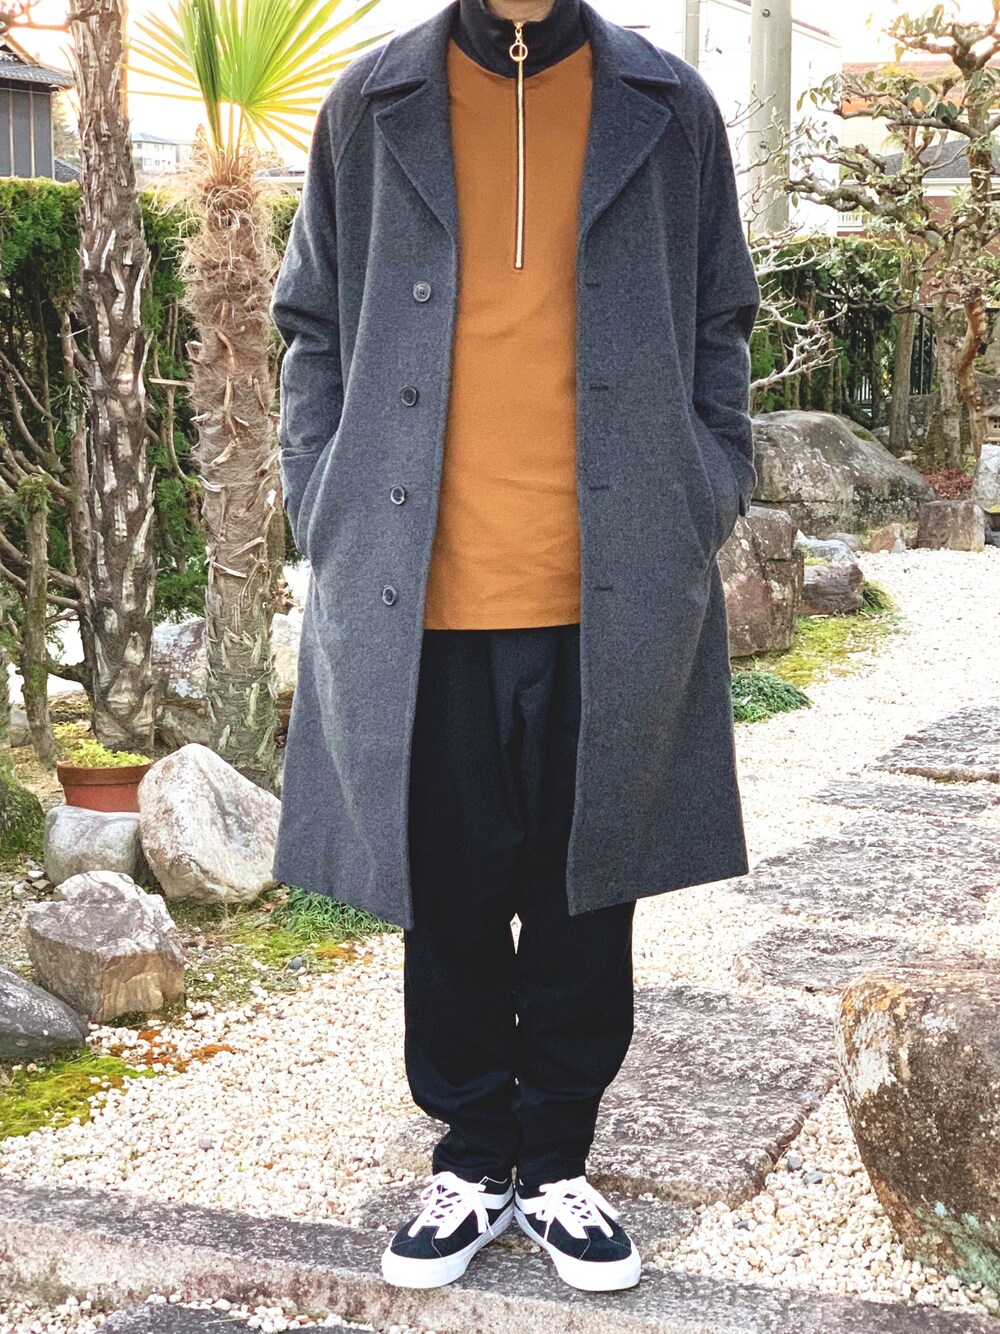 sotorichさんの「Stretch Typewriter Cook Pants（Graphpaper）」を使ったコーディネート